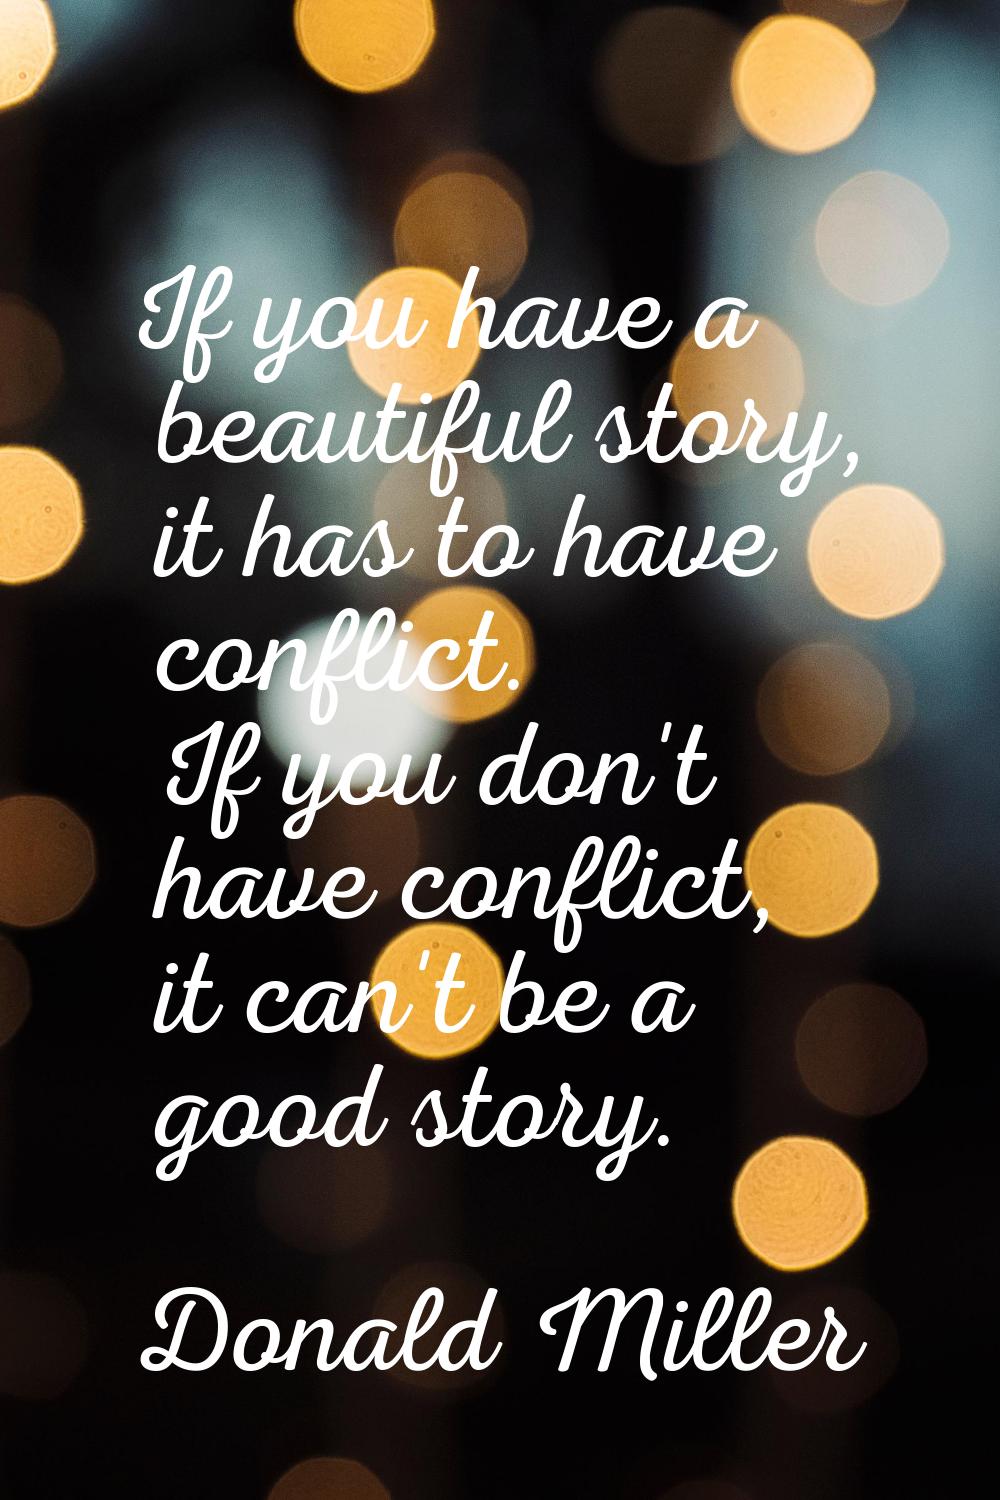 If you have a beautiful story, it has to have conflict. If you don't have conflict, it can't be a g